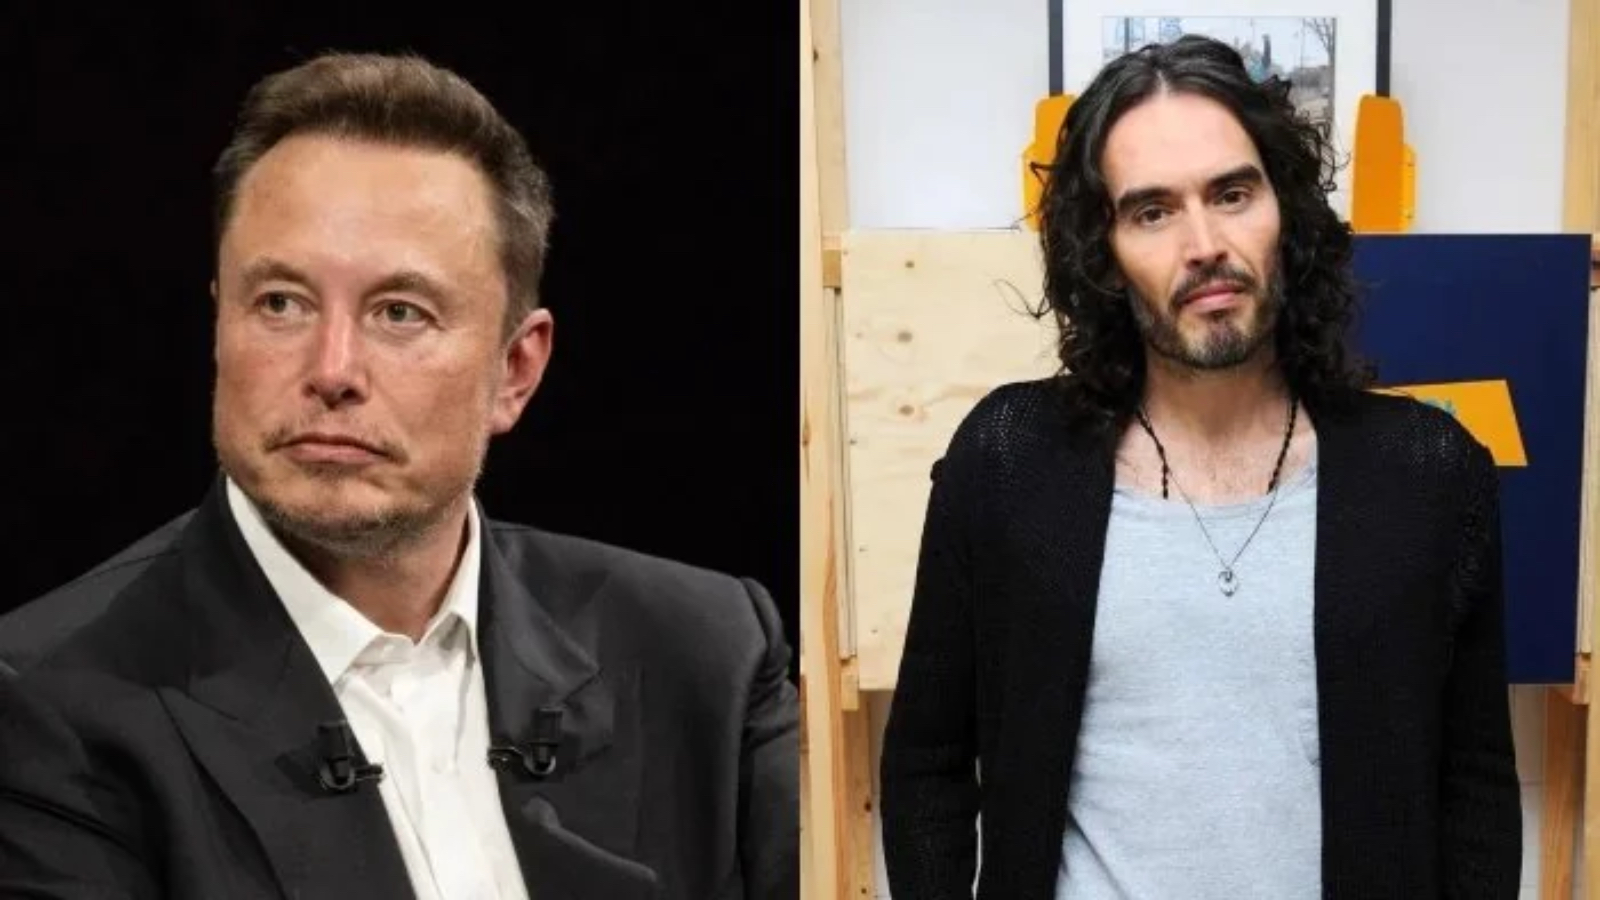 Elon Musk defends Russell Brand against rape accusations: 'That man is not evil'